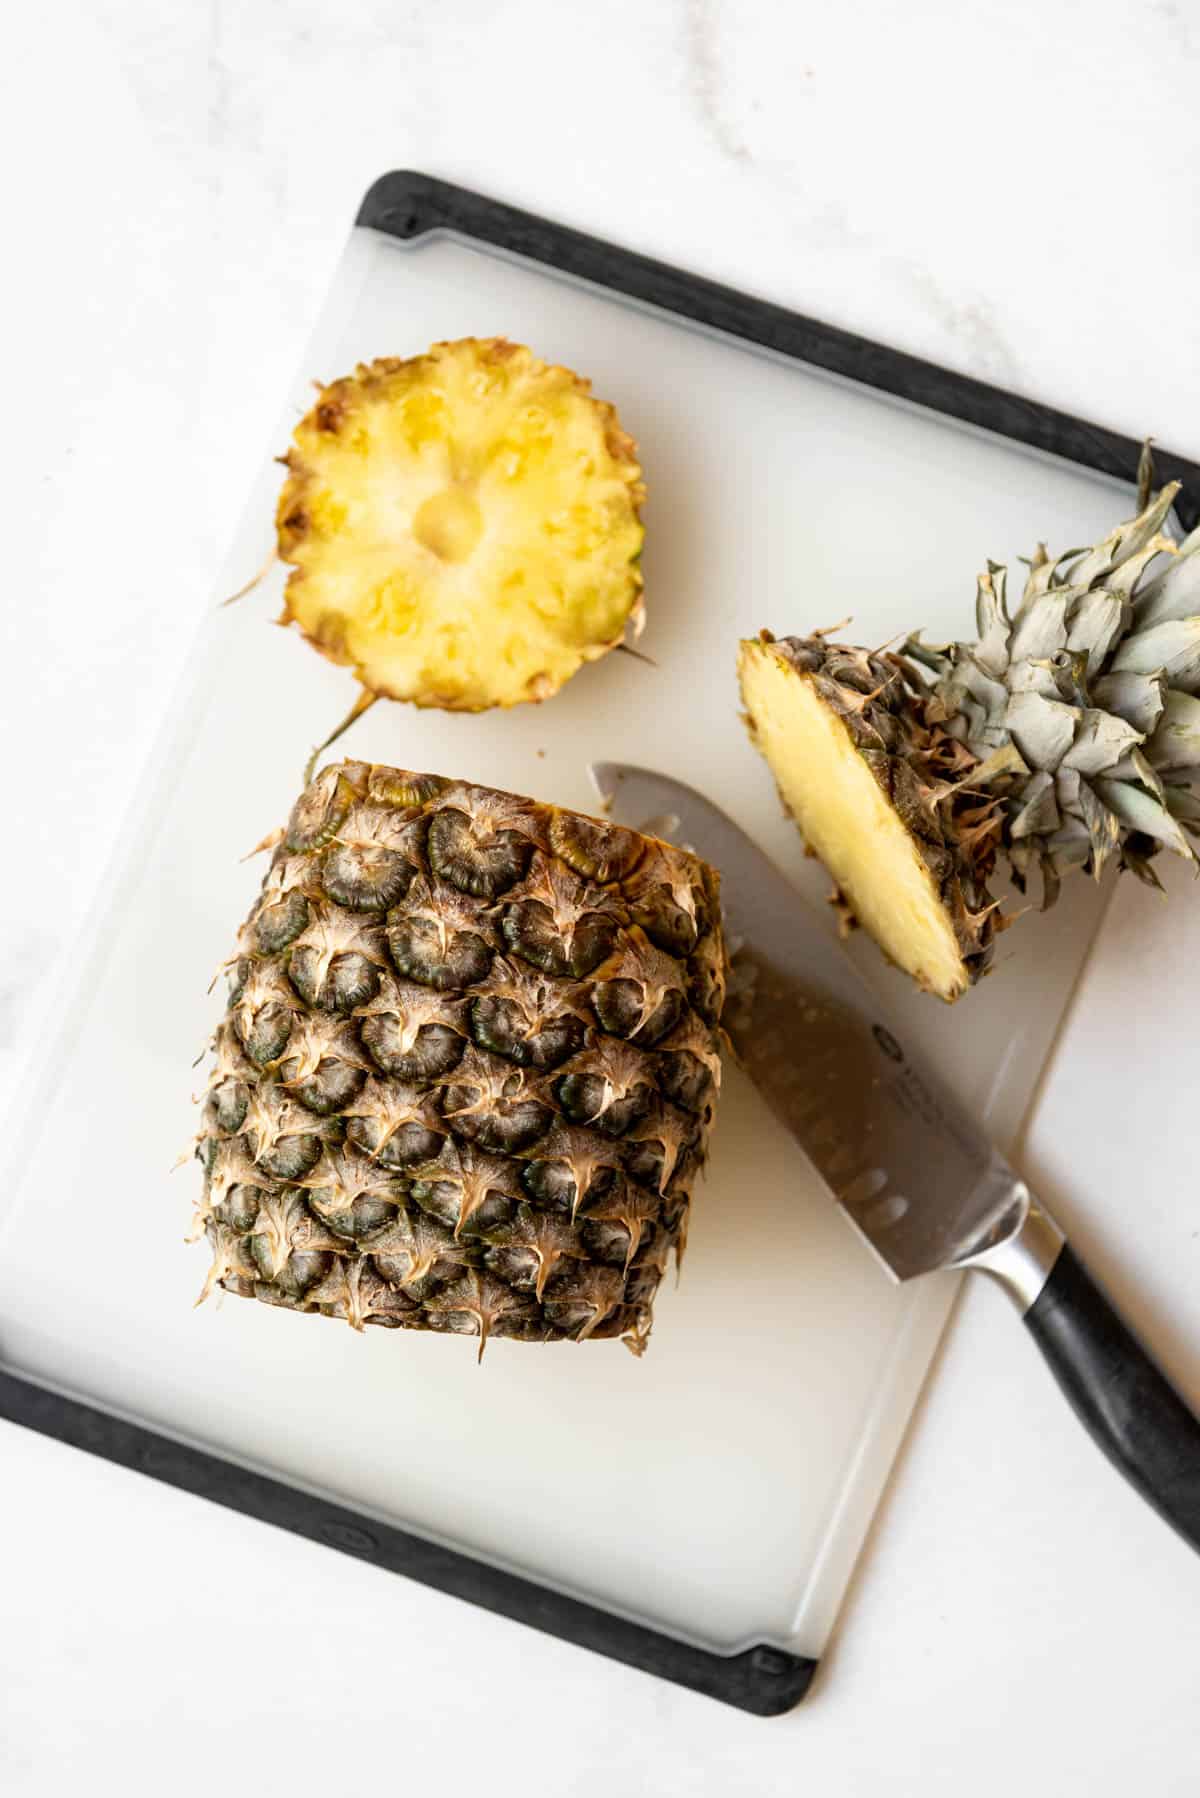 A pineapple with the crown and bottom sliced off on a cutting board.